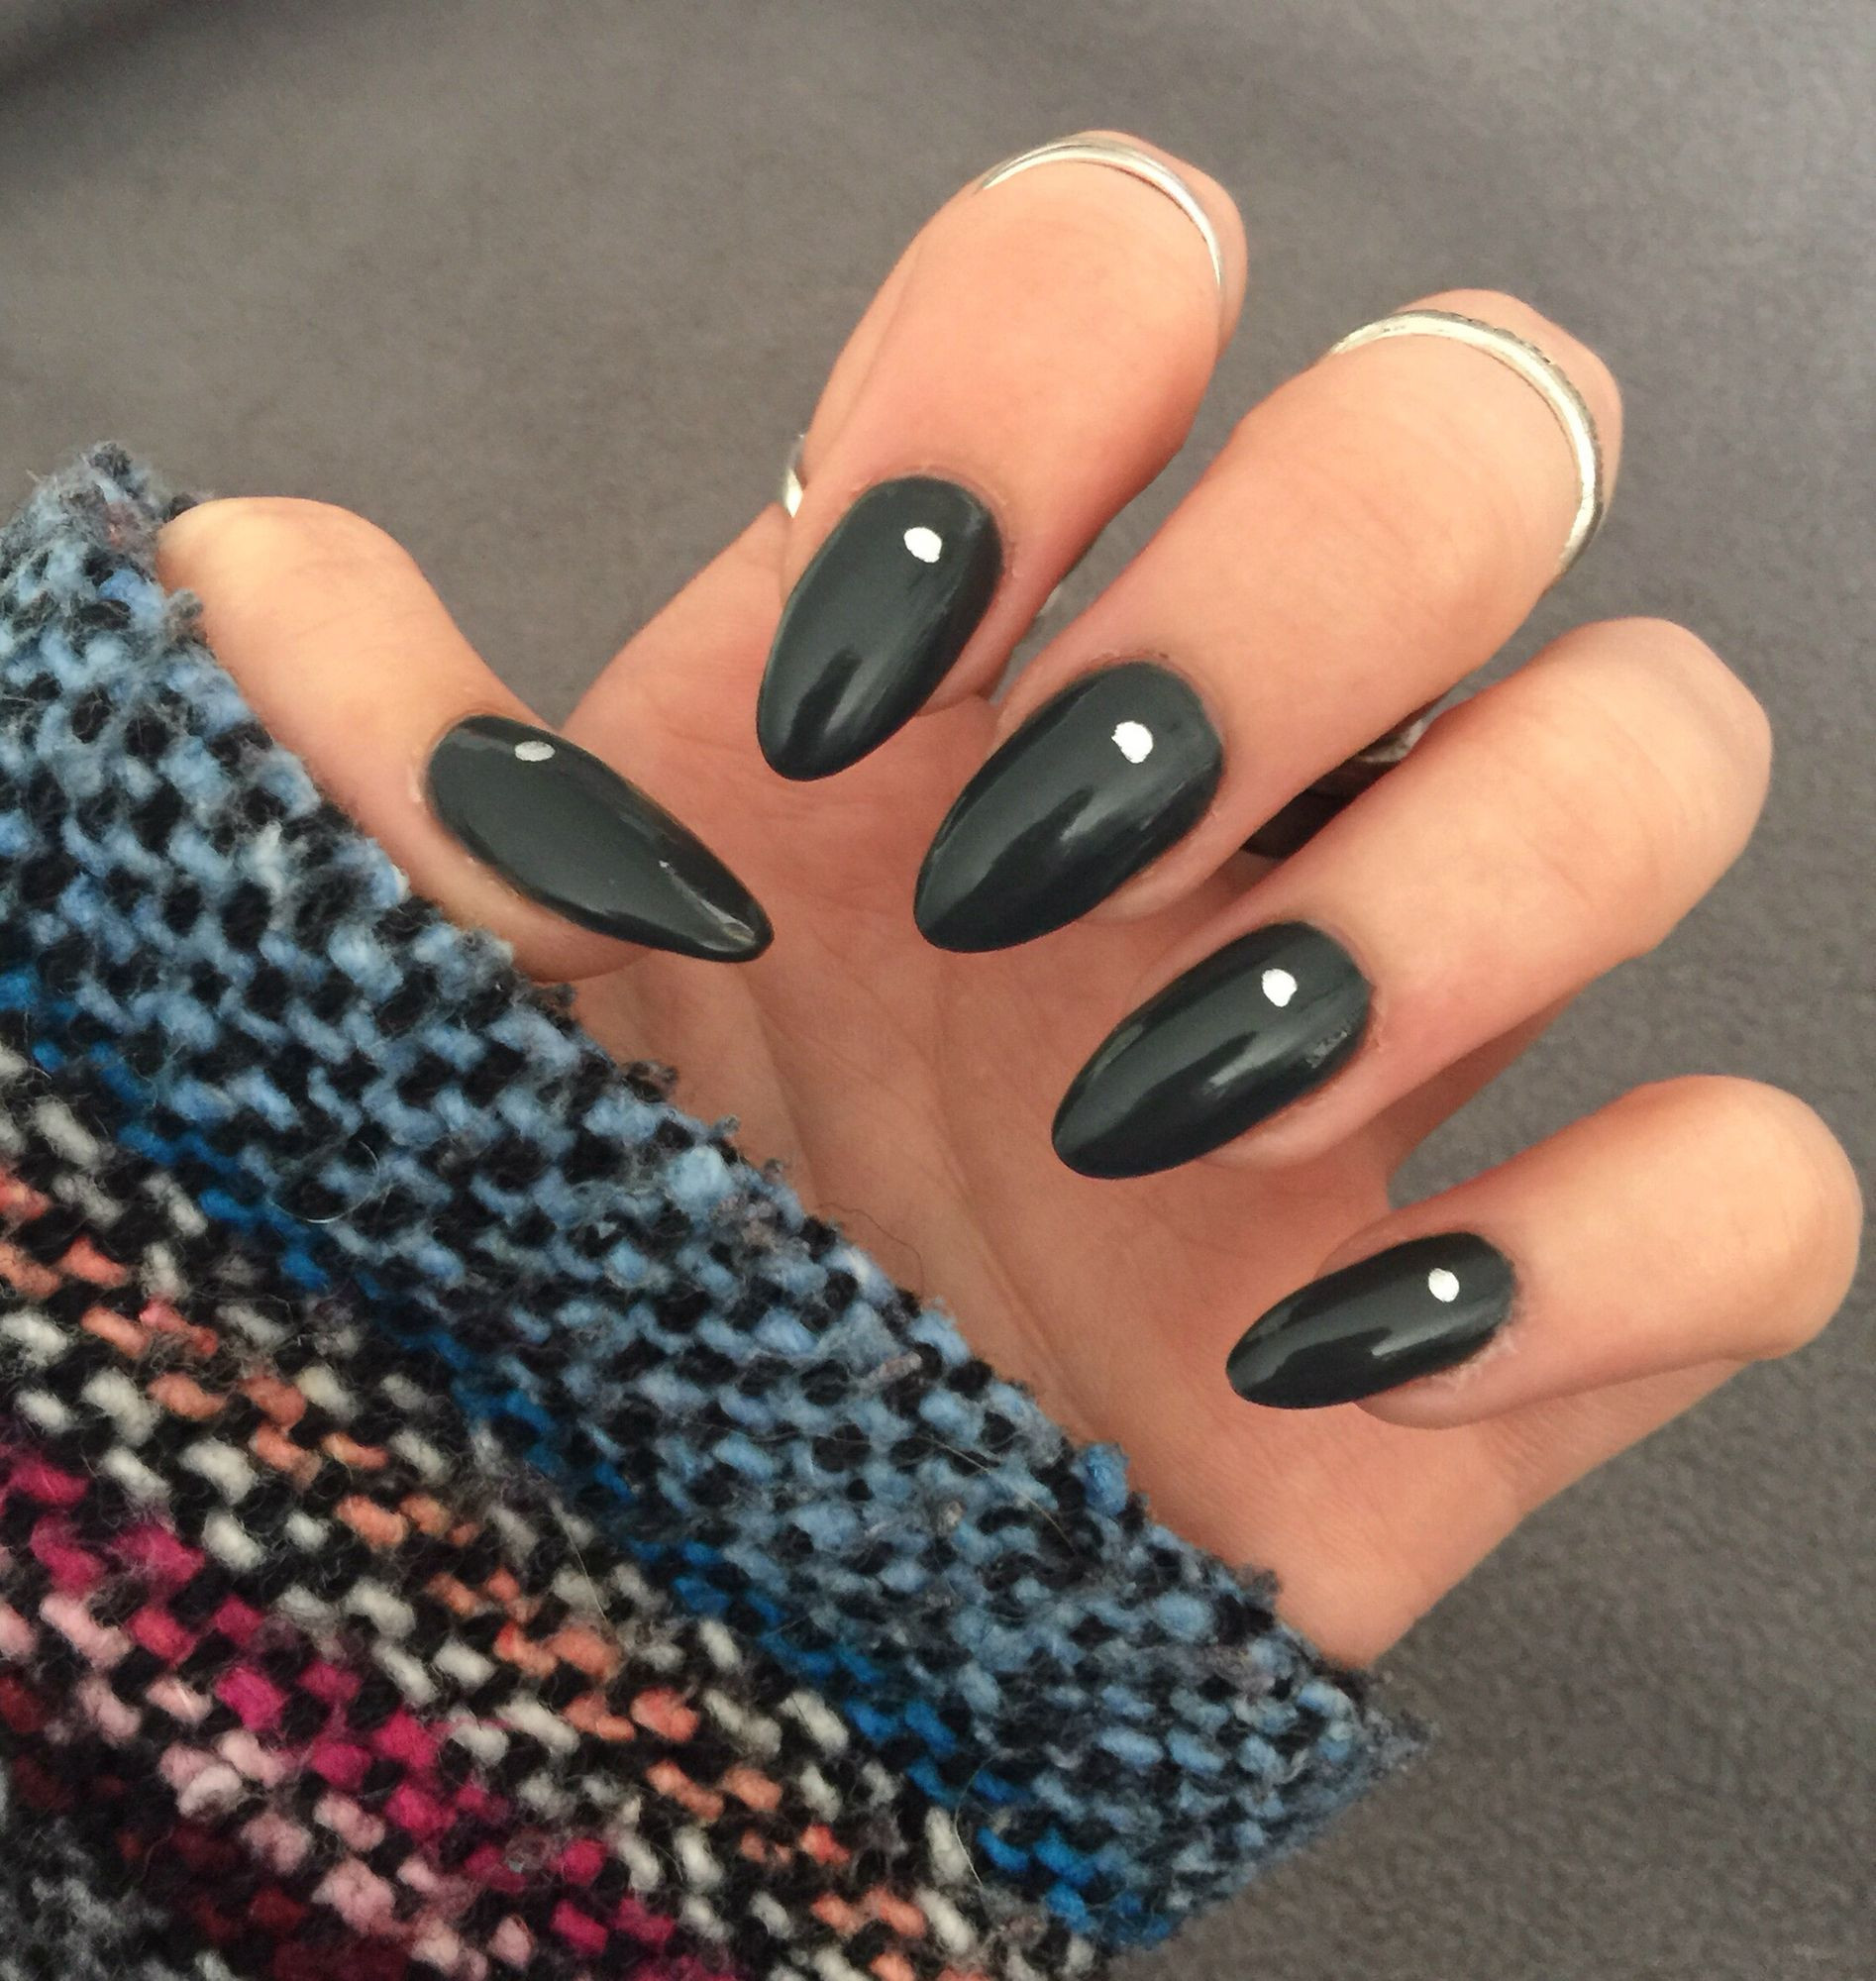 Almond Shaped Acrylic Nail Designs
 Long dark gray almond shaped nails with silver dot design